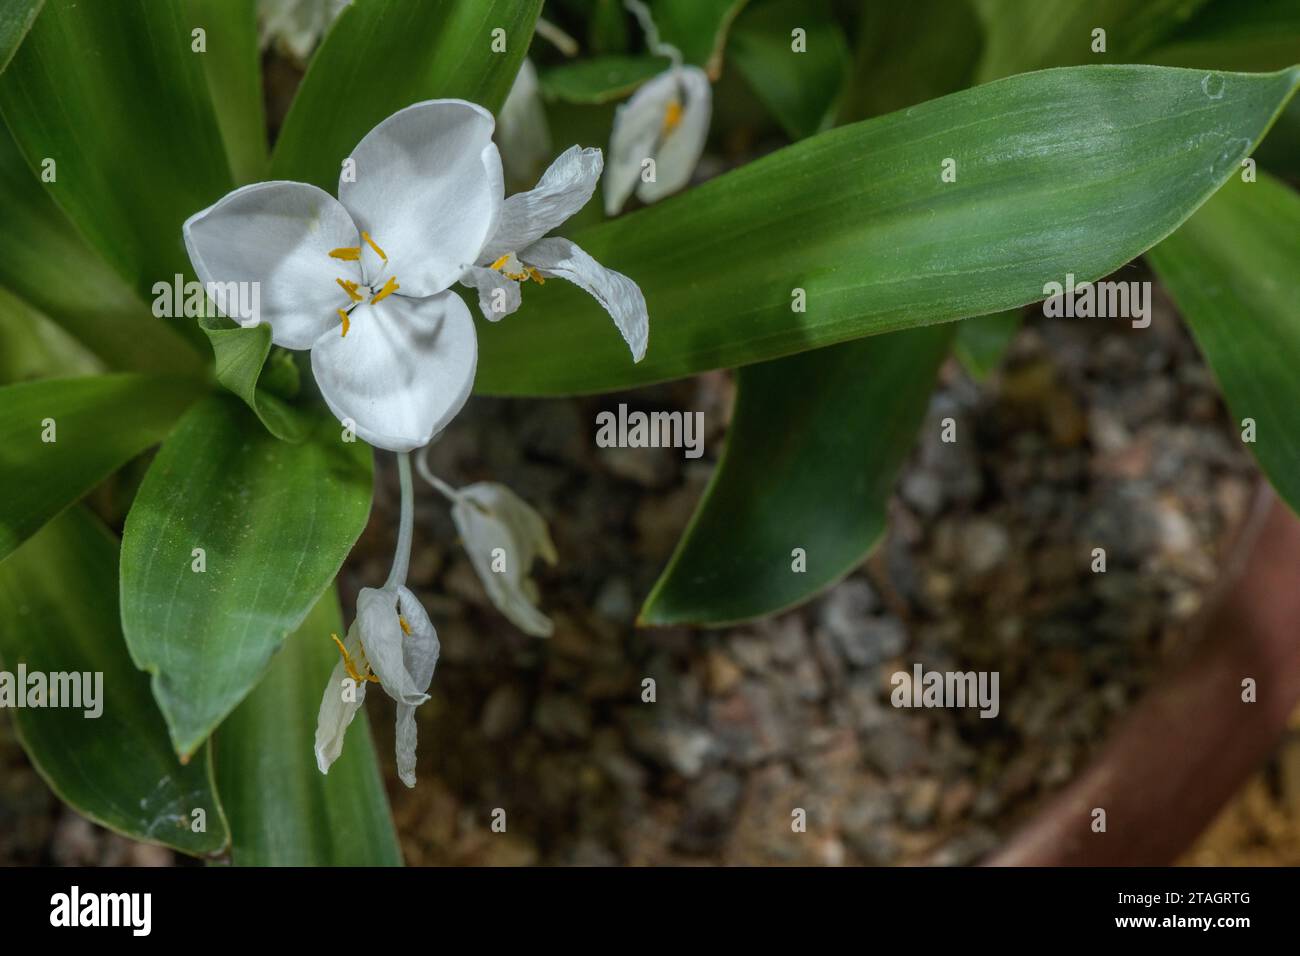 A high-altitude flower, Weldenia, Weldenia candida from Mexico. Stock Photo